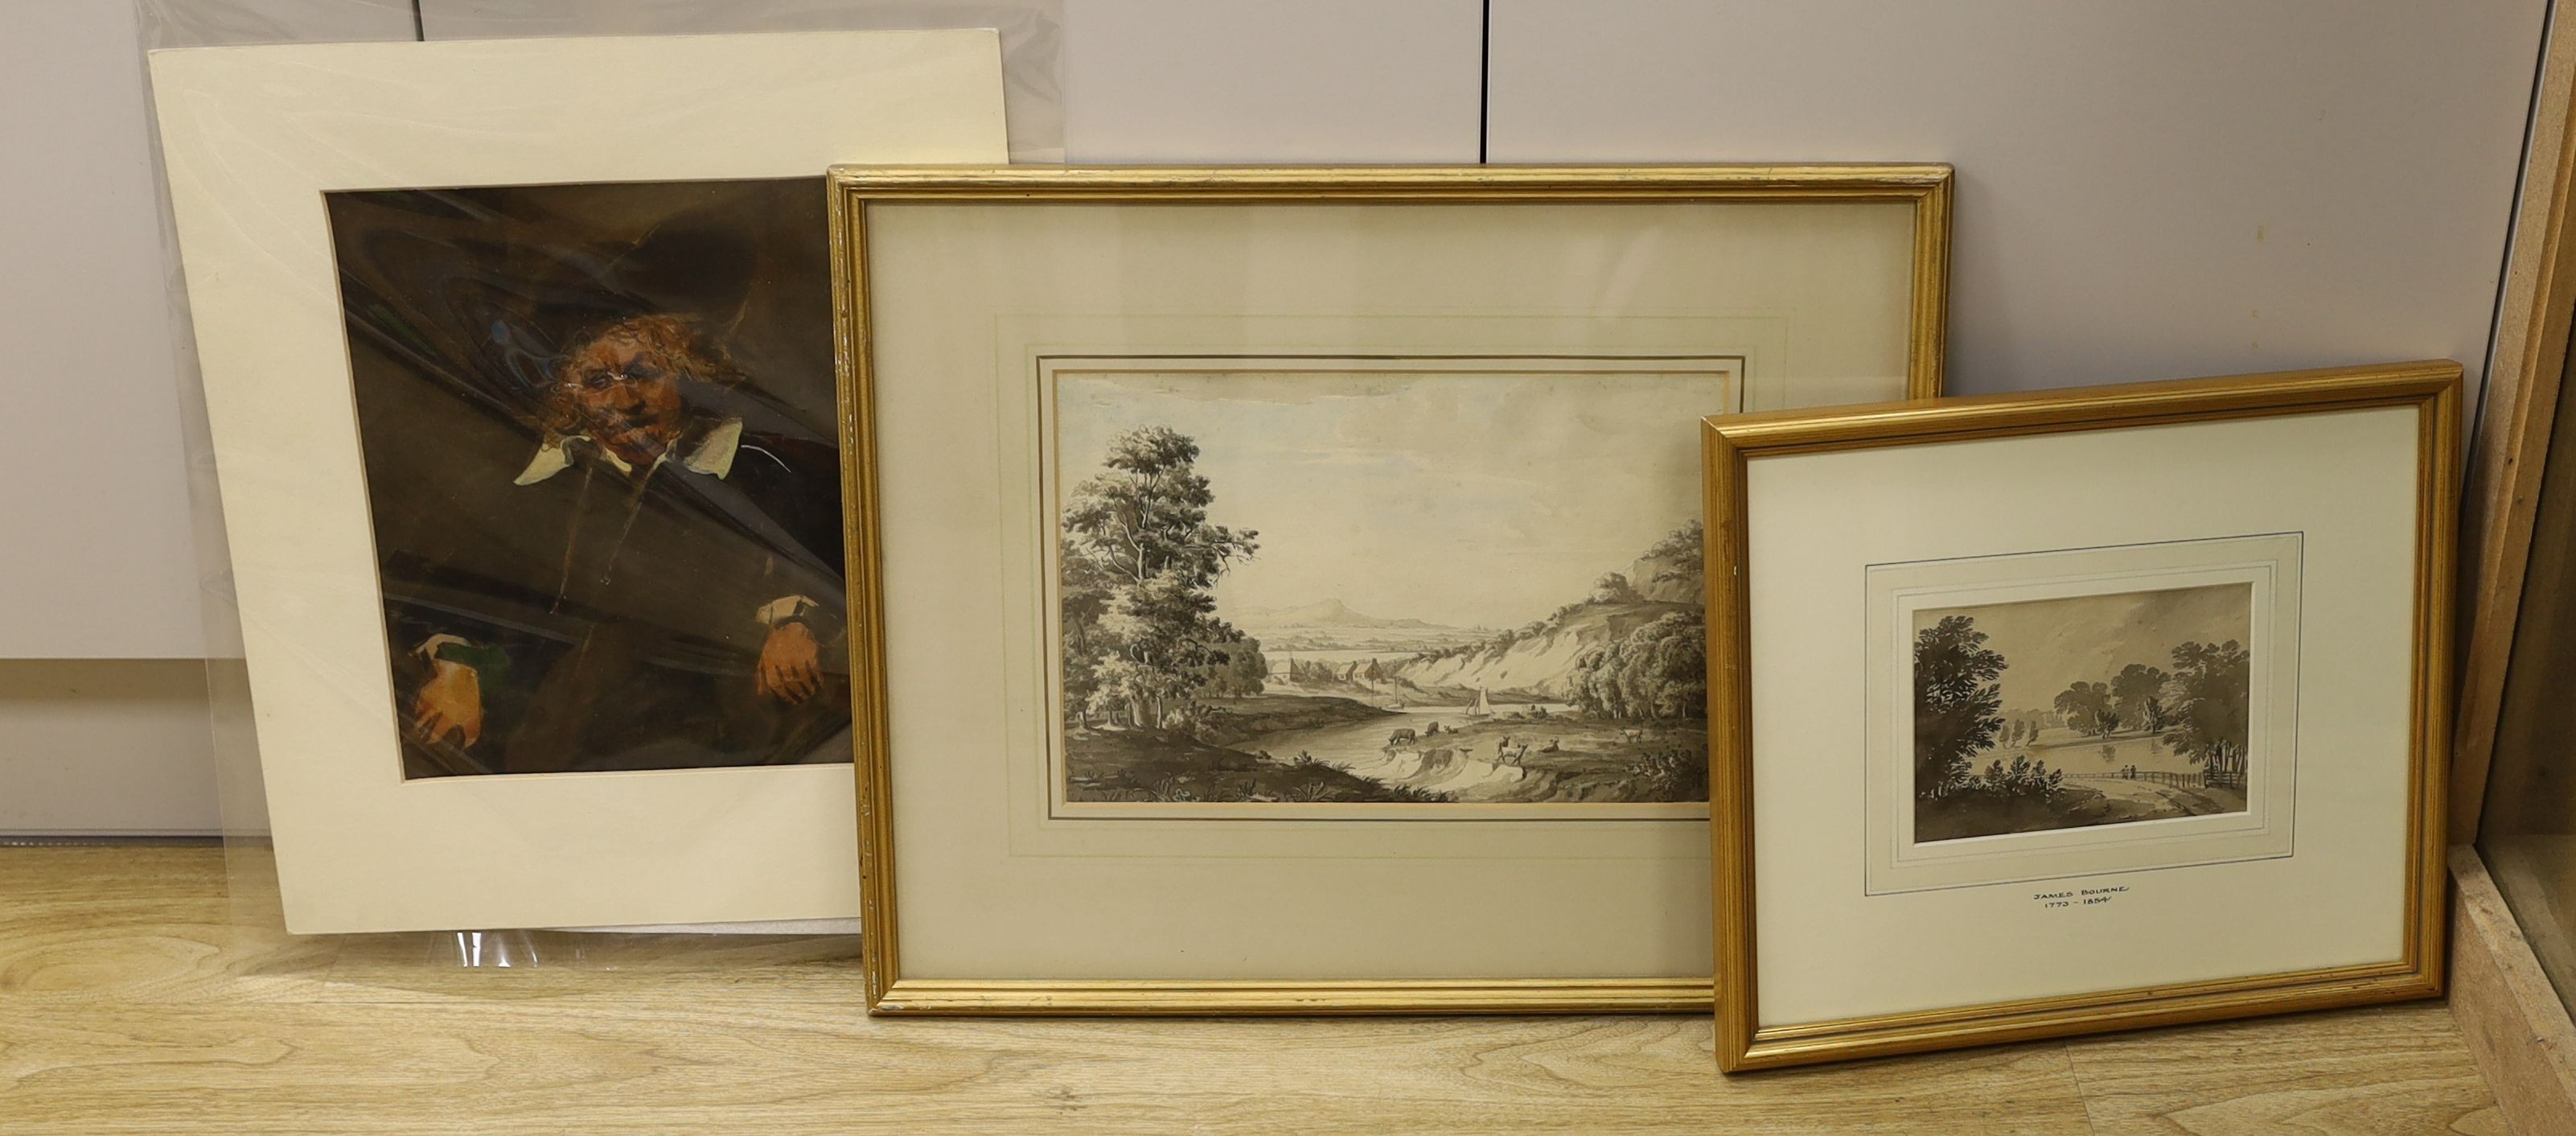 Attributed to Mary Mitford, 1770, watercolour en grisaille, River landscape, Appleby Brothers label verso, 22 x 32cm, a small watercolour attributed to James Bourne and an unframed watercolour, figure study, signed John